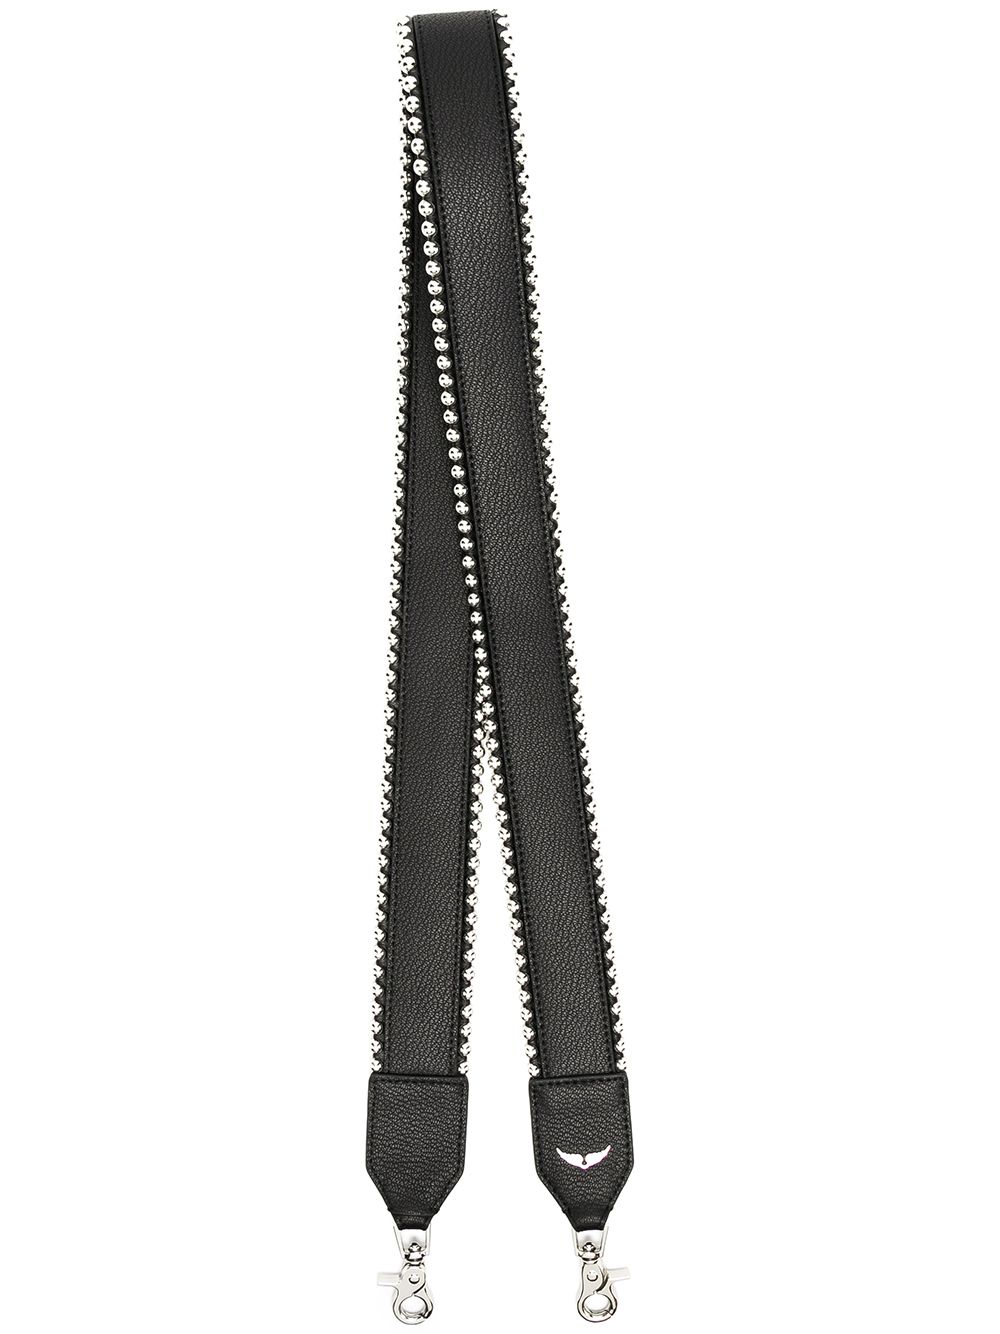 Zadig&Voltaire grained leather stud piping bag strap - Black von Zadig&Voltaire